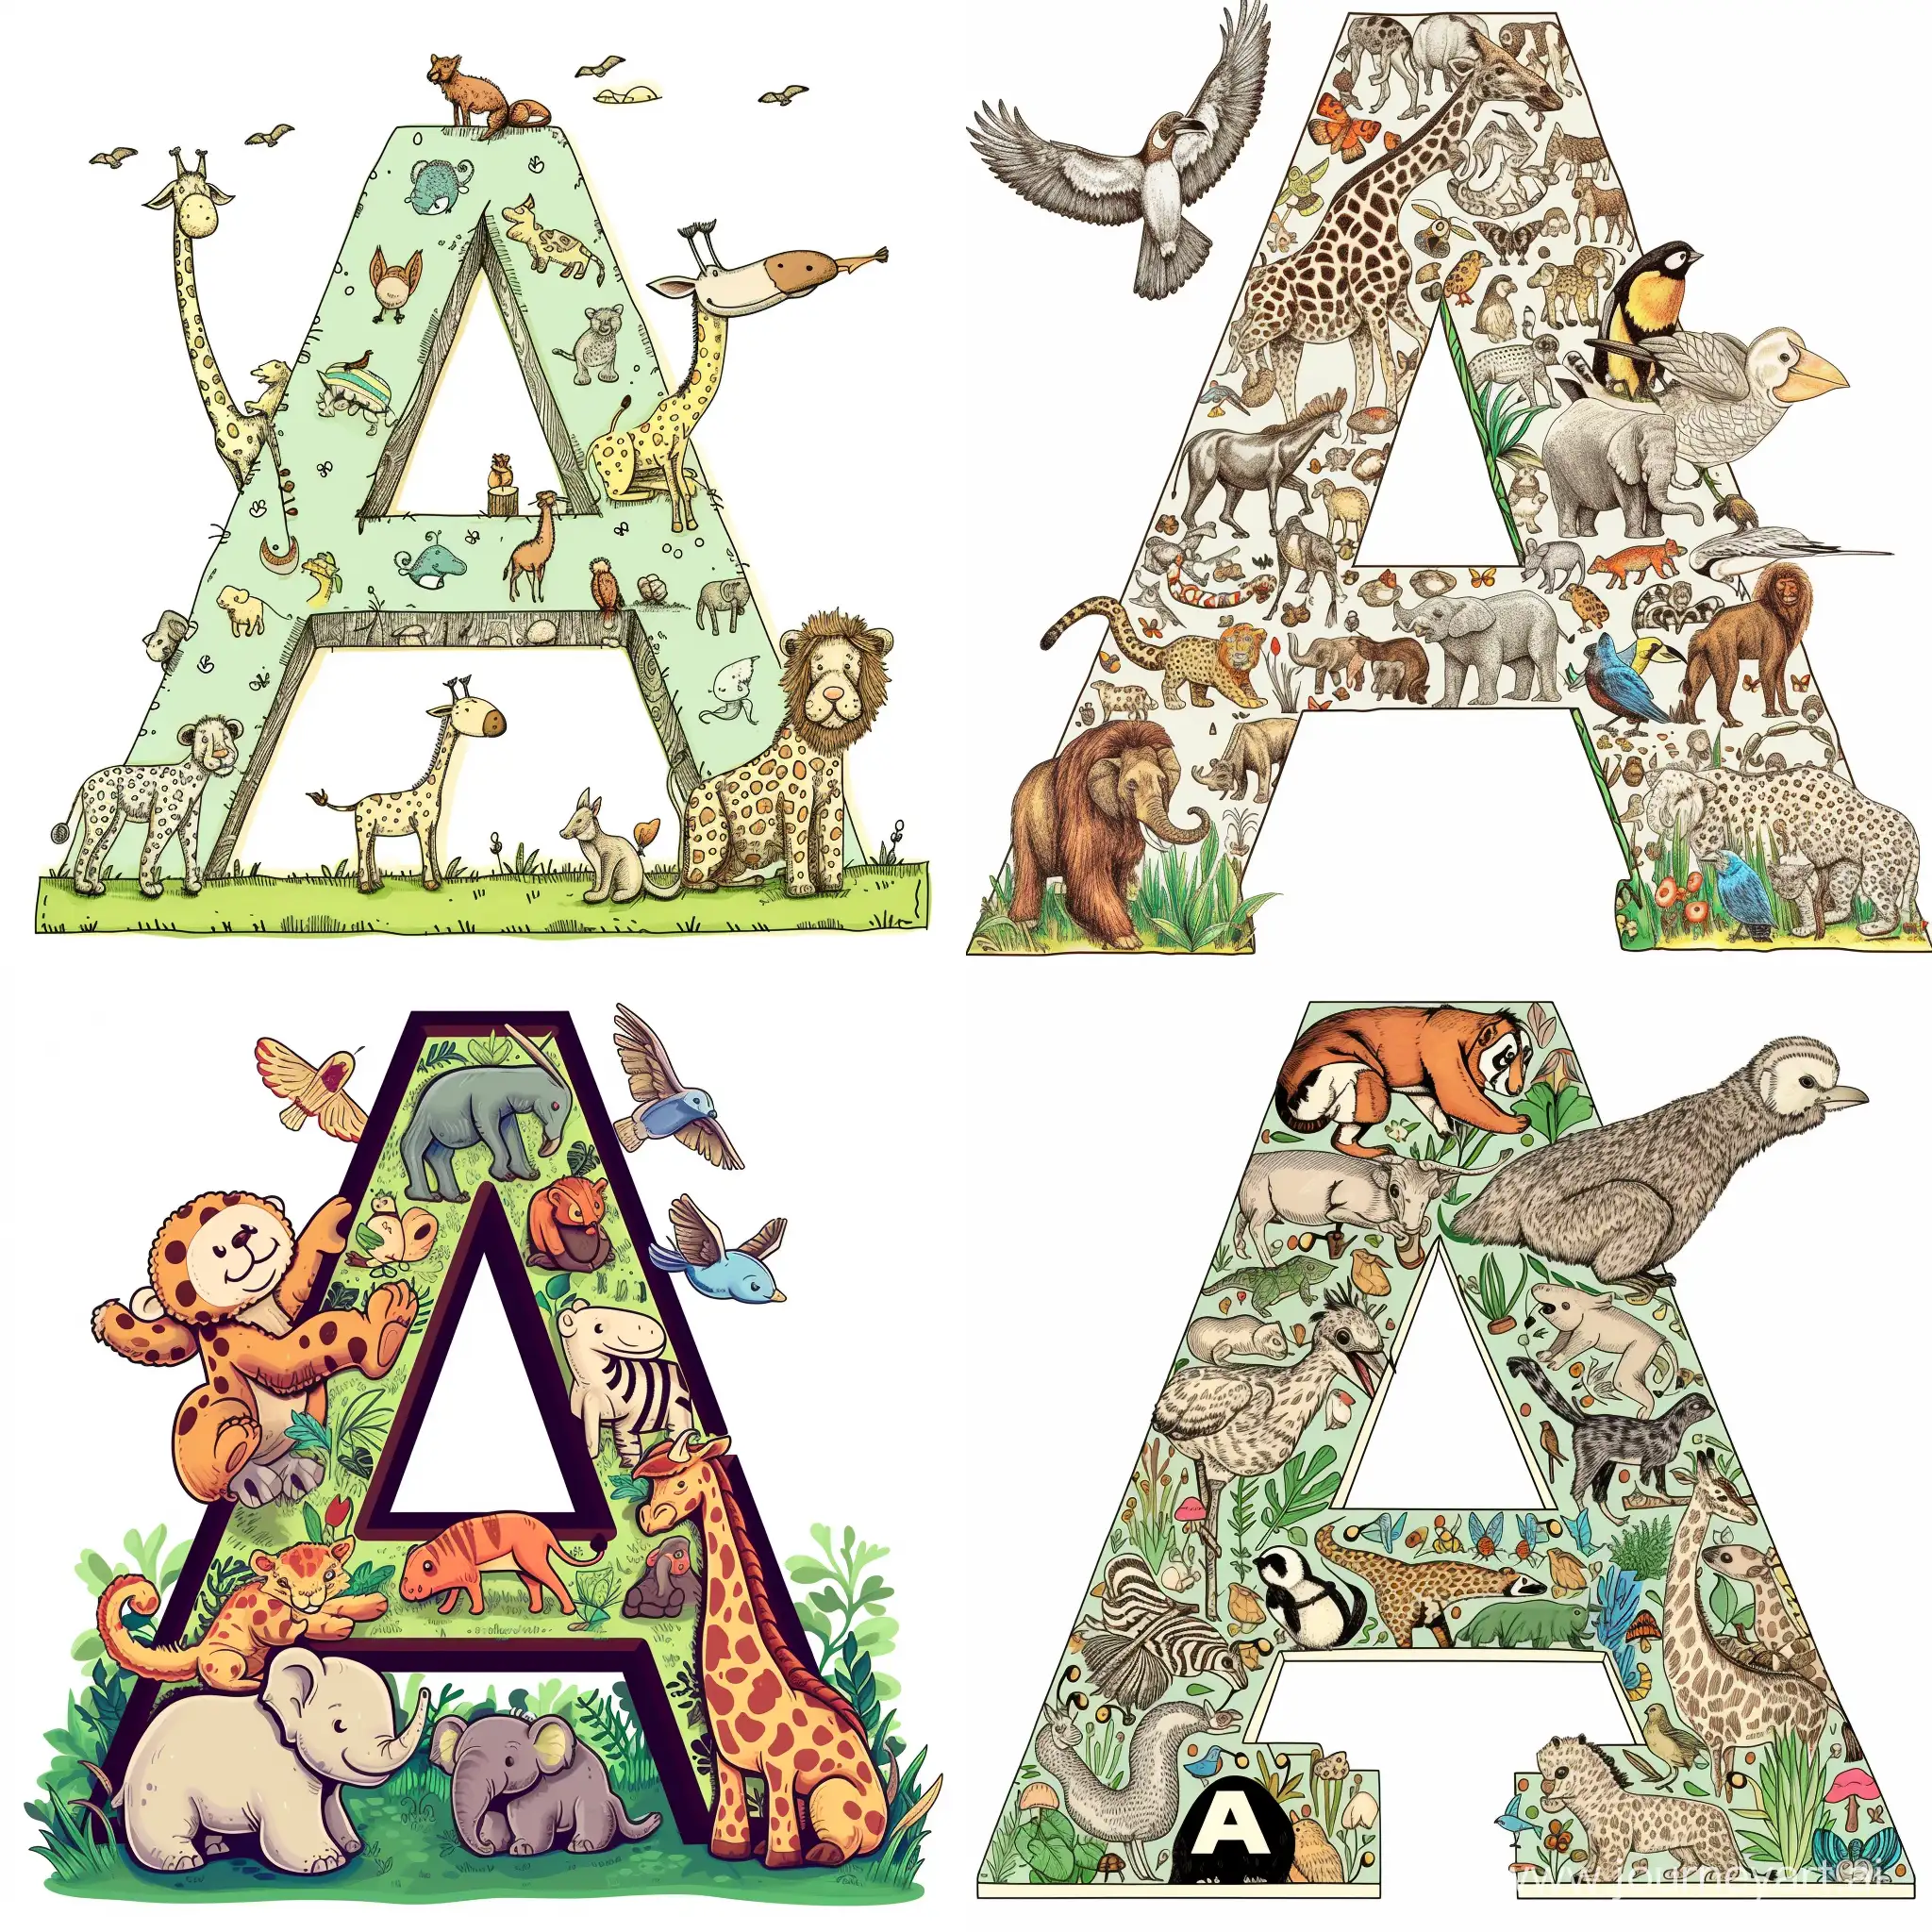 give a vector letter A to be traced on a kid book with animals starting with A